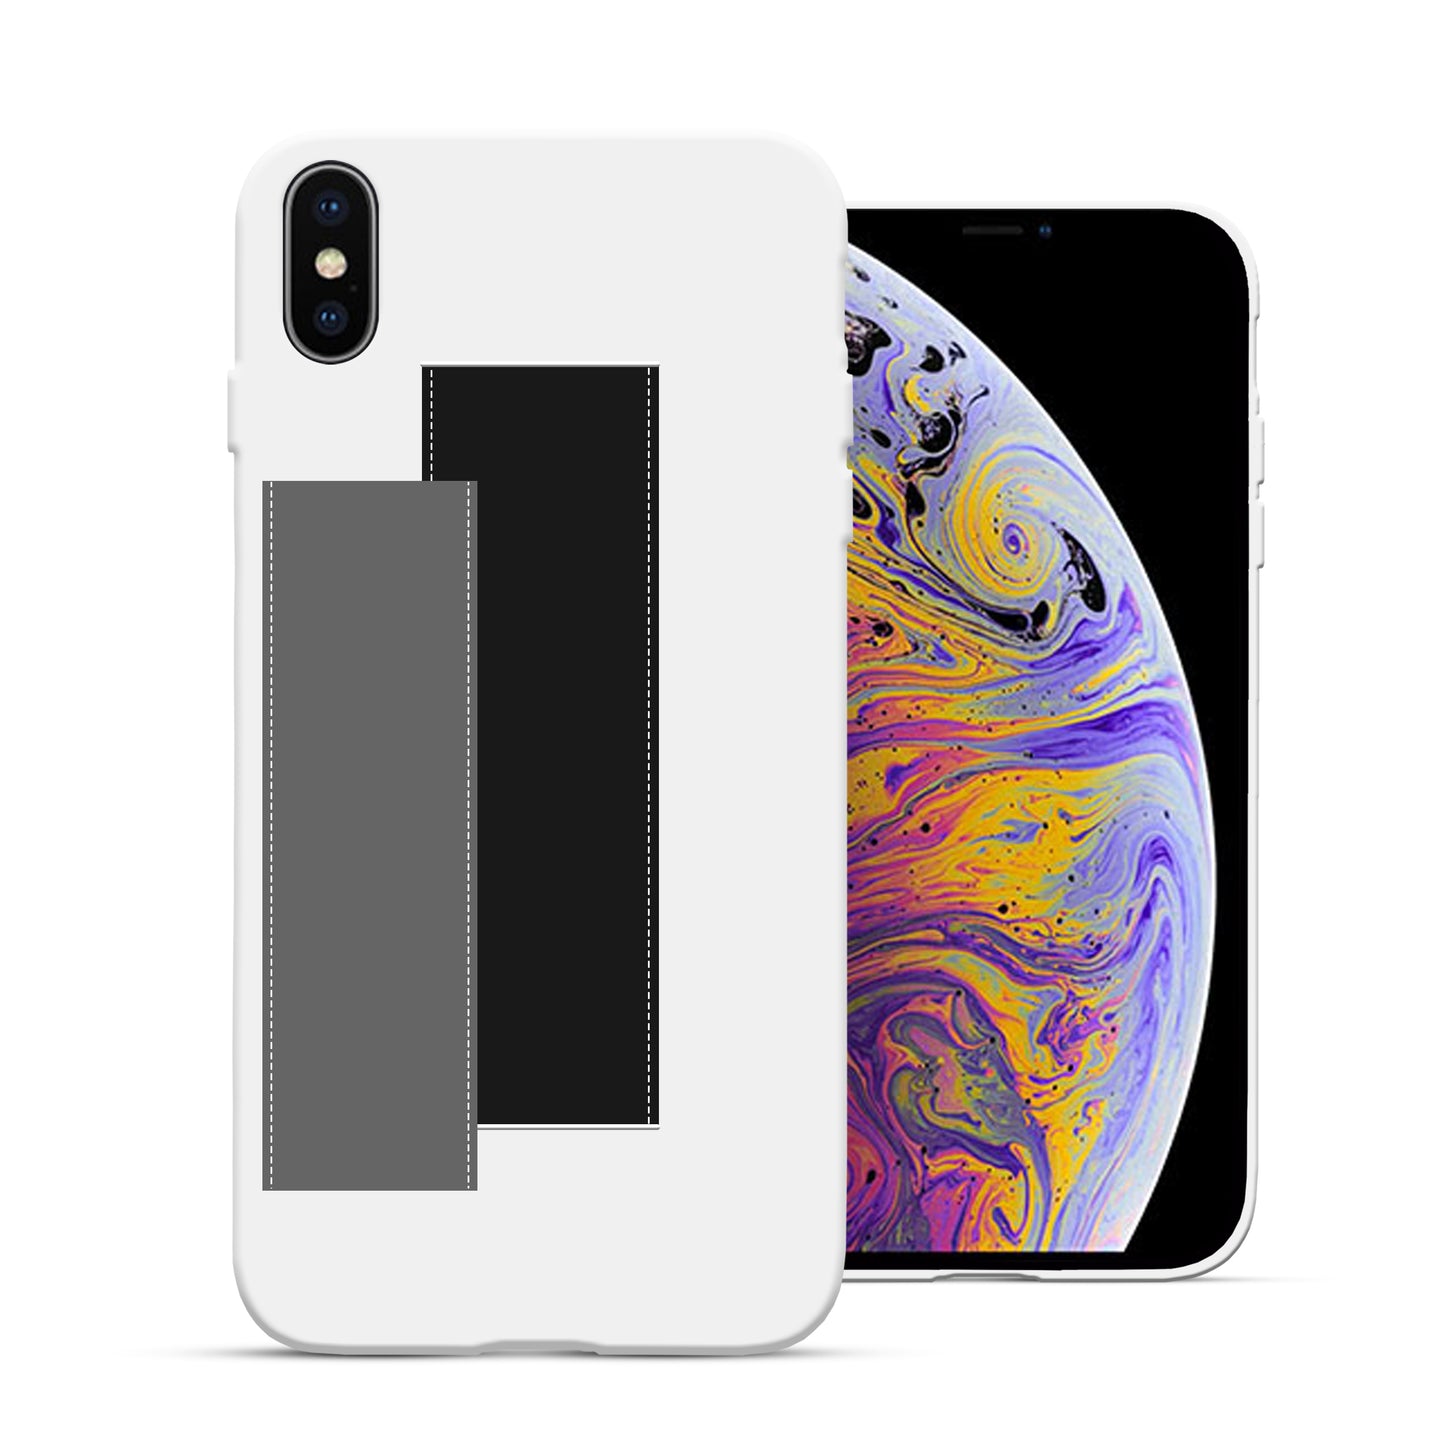 Finger Loop Phone Case For iPhone XS Max White With Black & Grey Strap